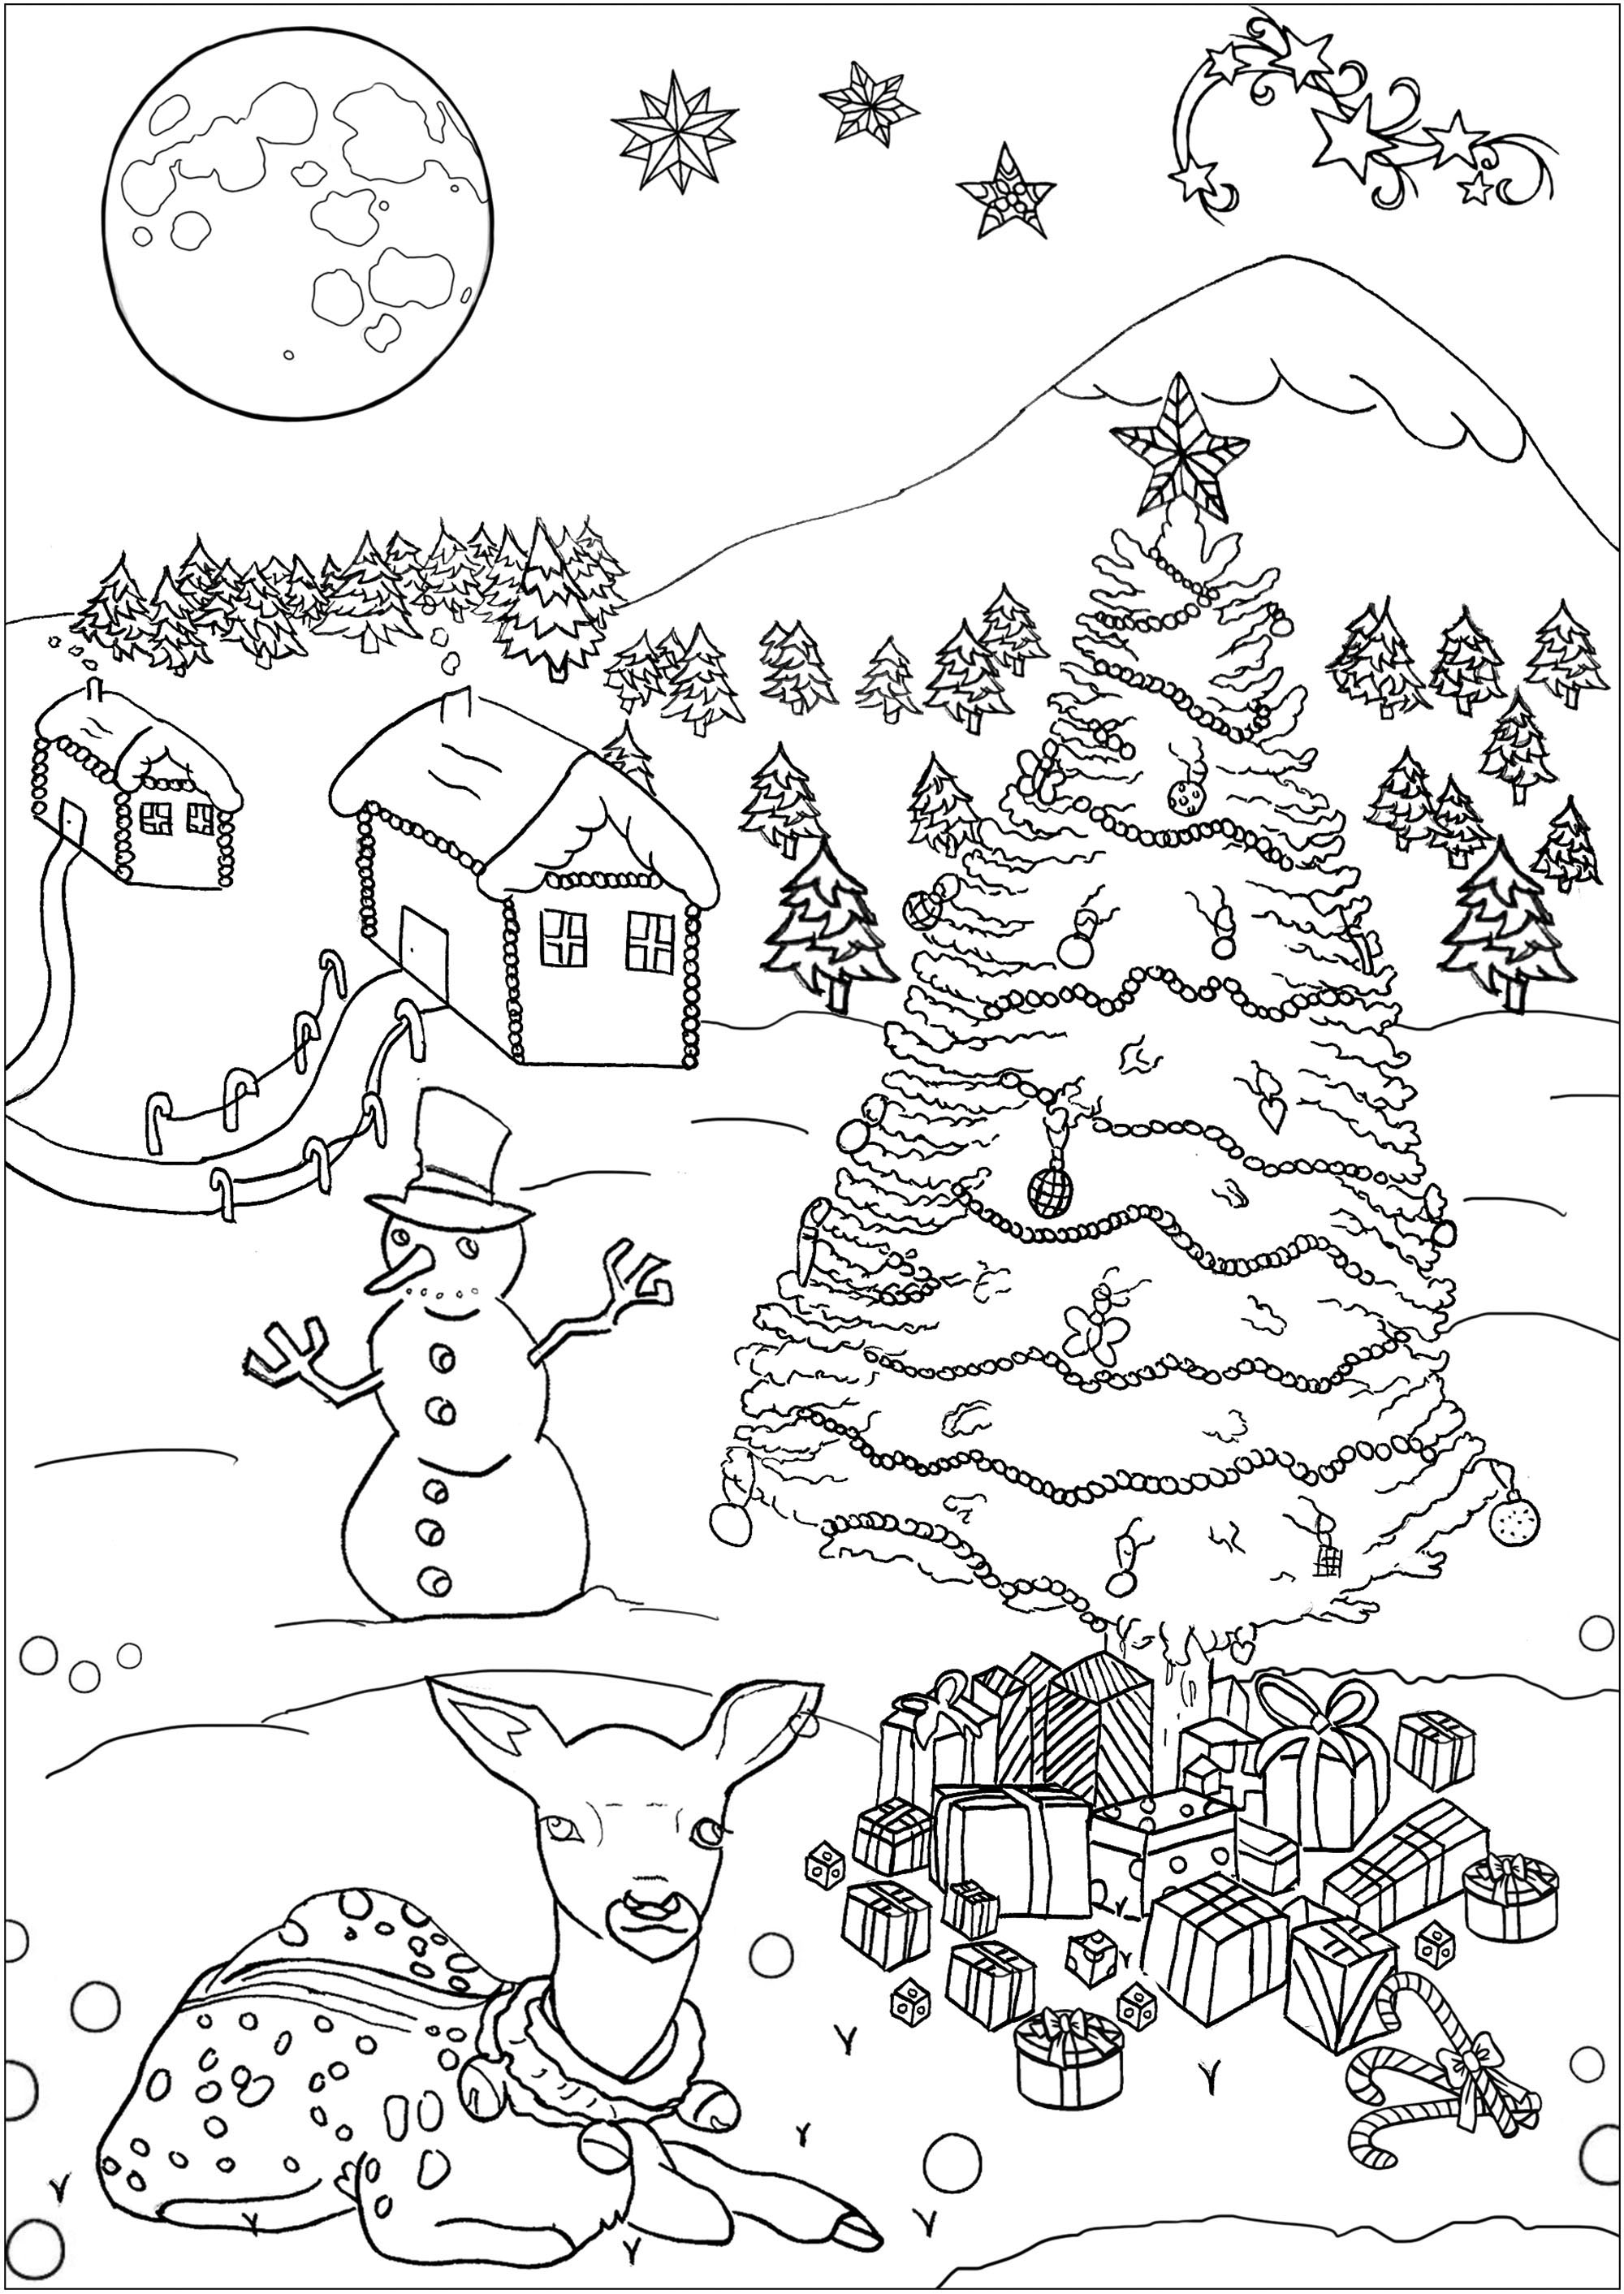 Christmas - Free printable Coloring pages for kids